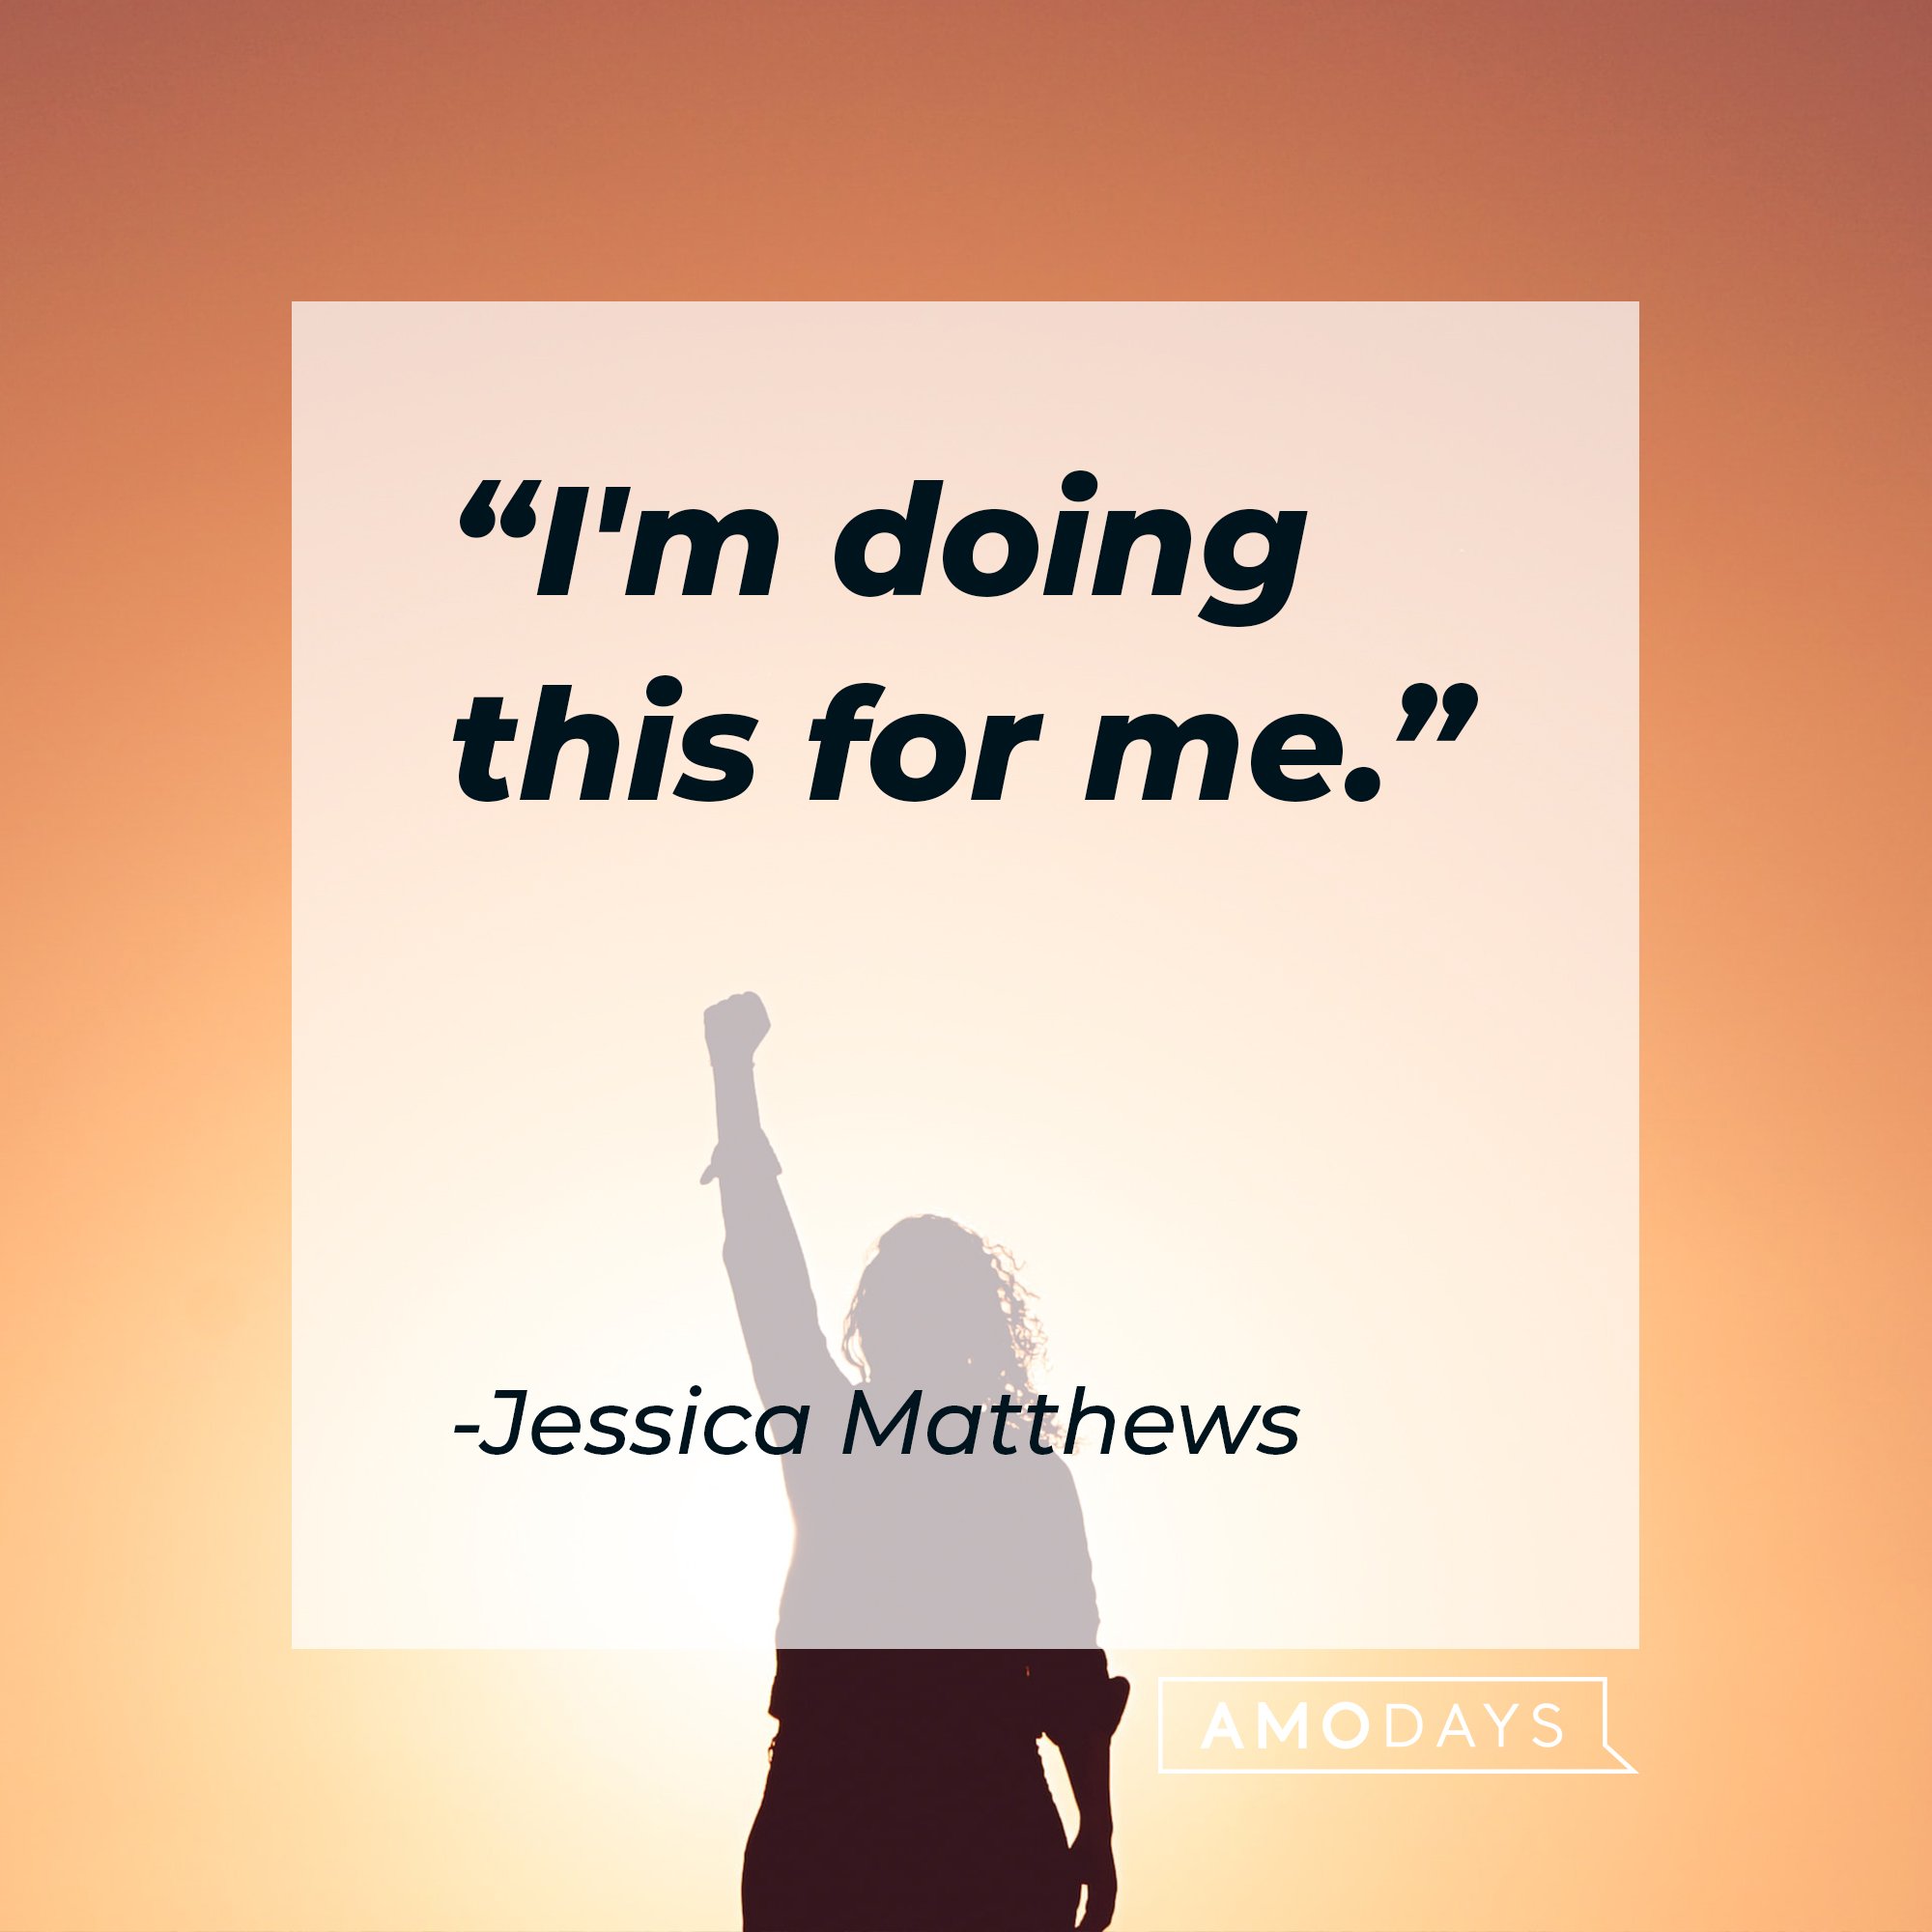 Jessica Matthews’ quote: "I'm doing this for me." | Image: AmoDays 